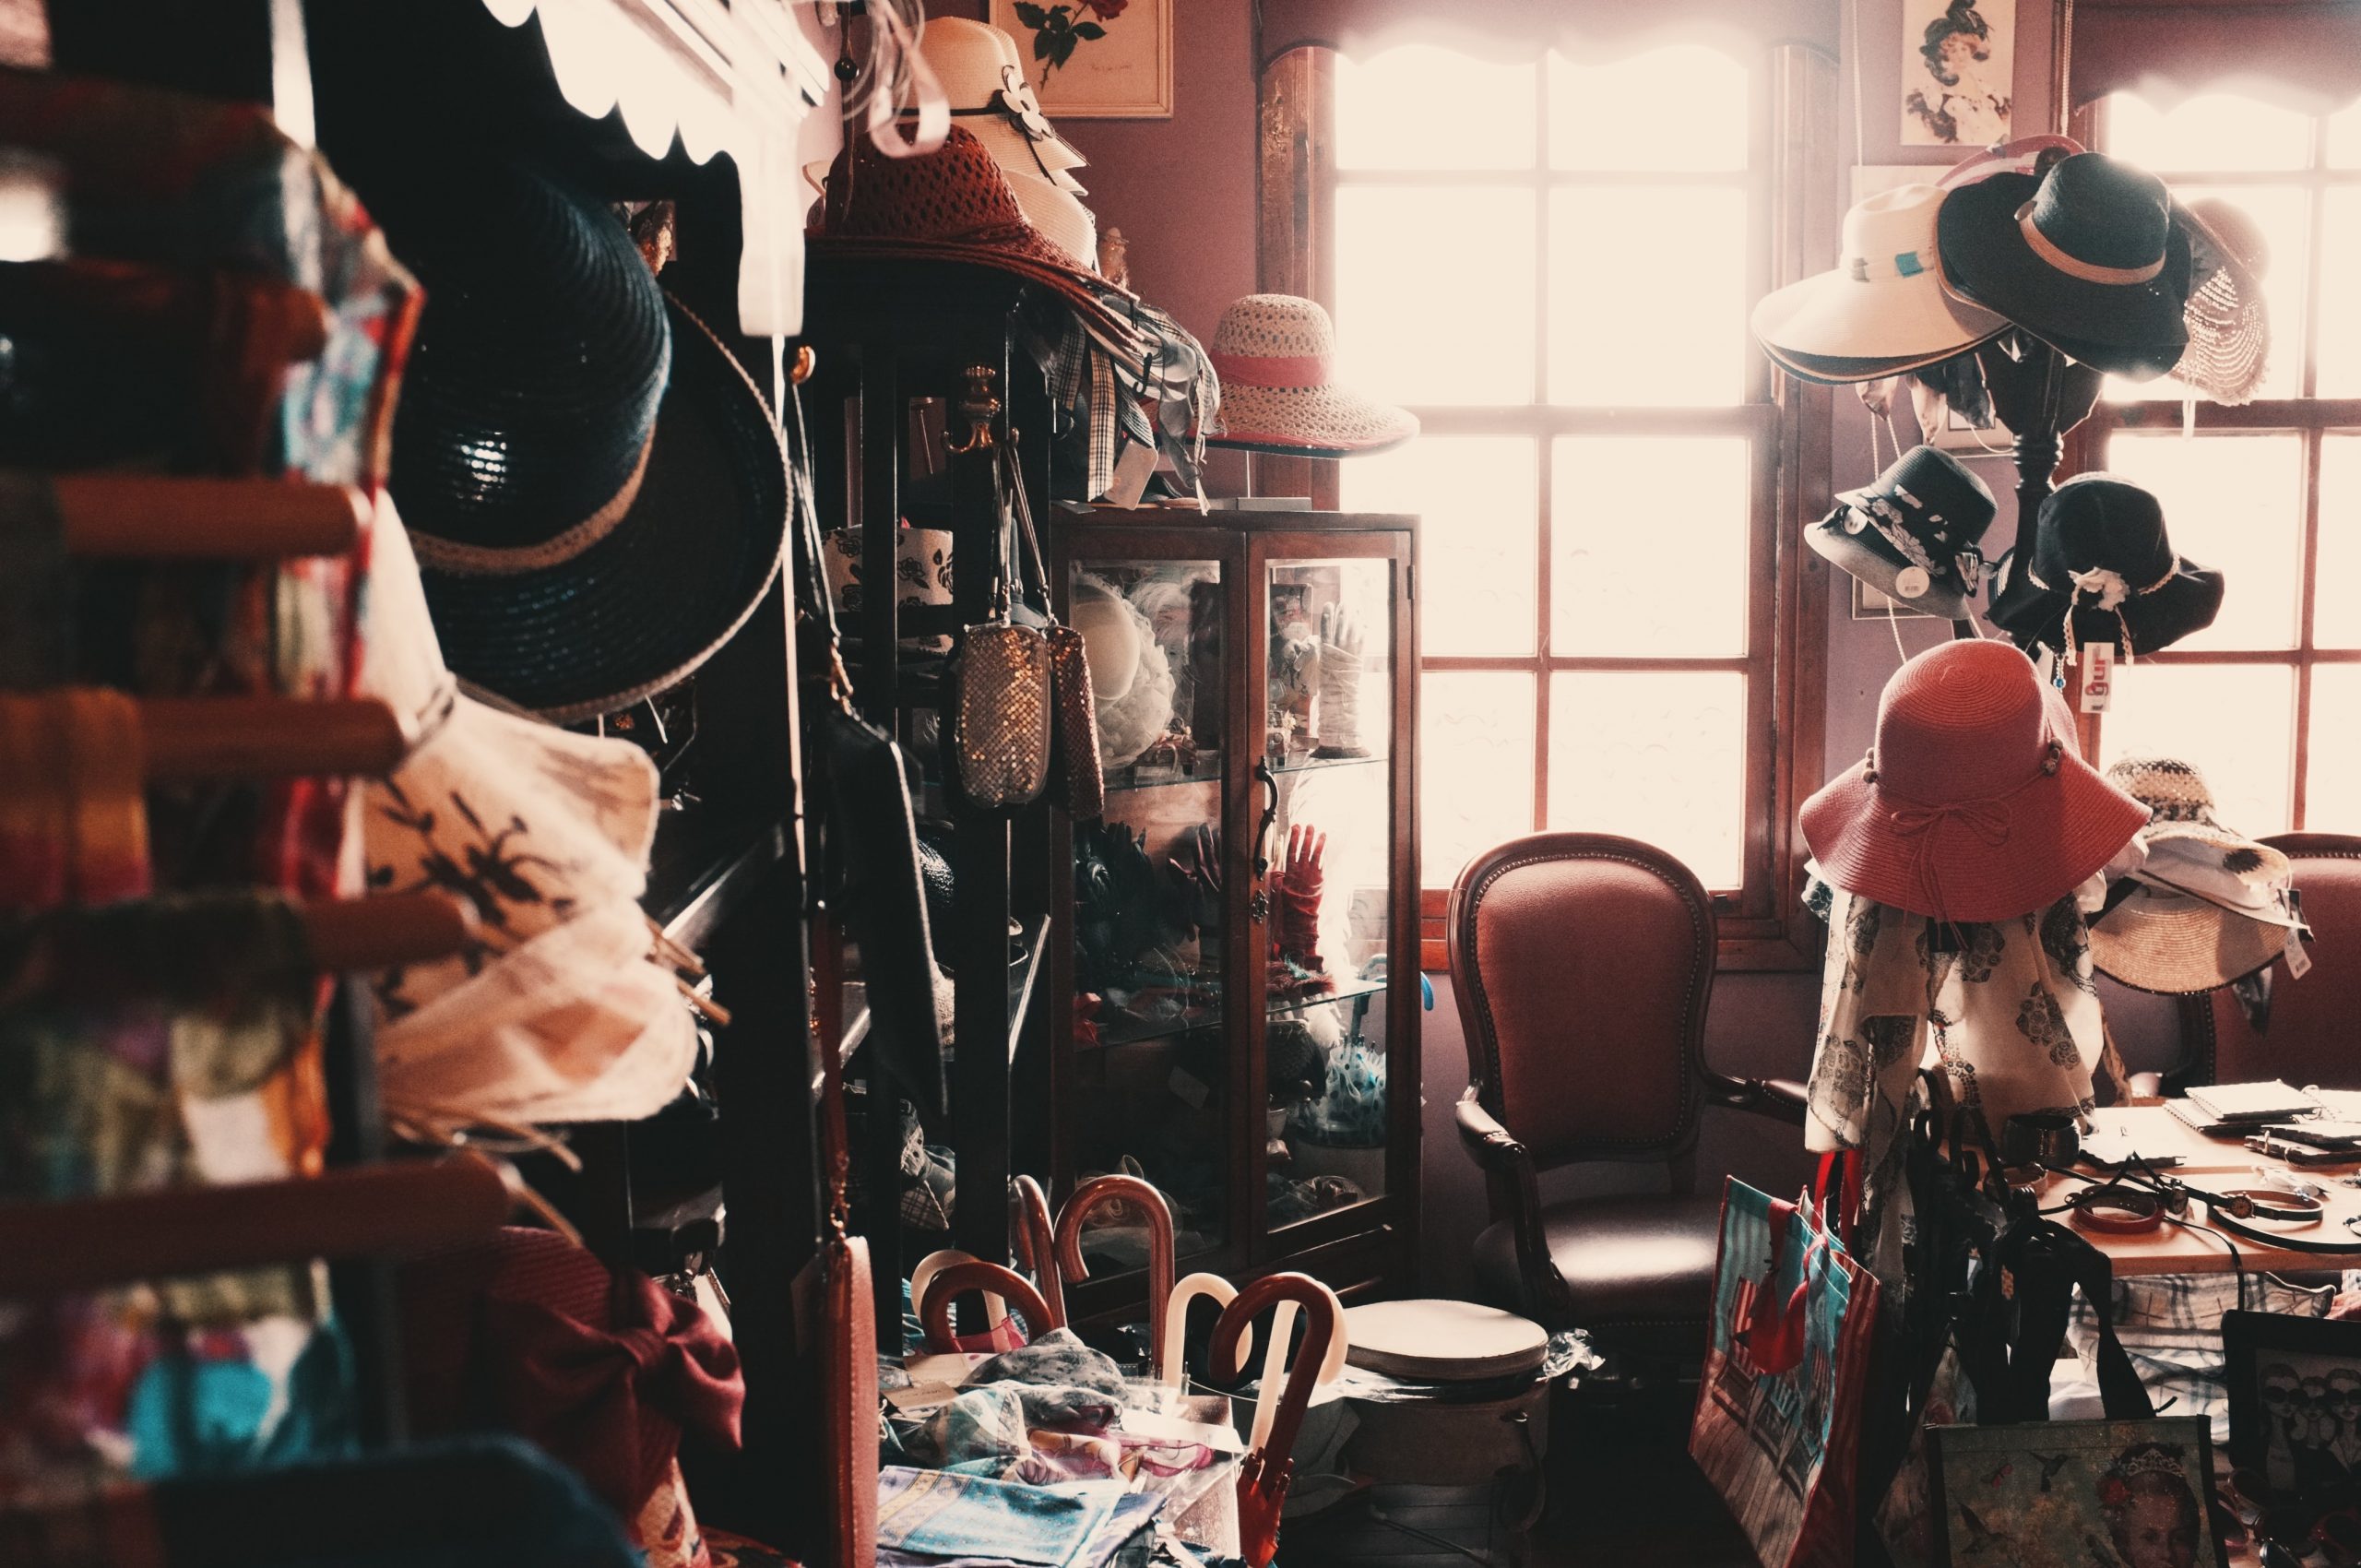 Room cluttered with vintage items such as hats and umbrellas